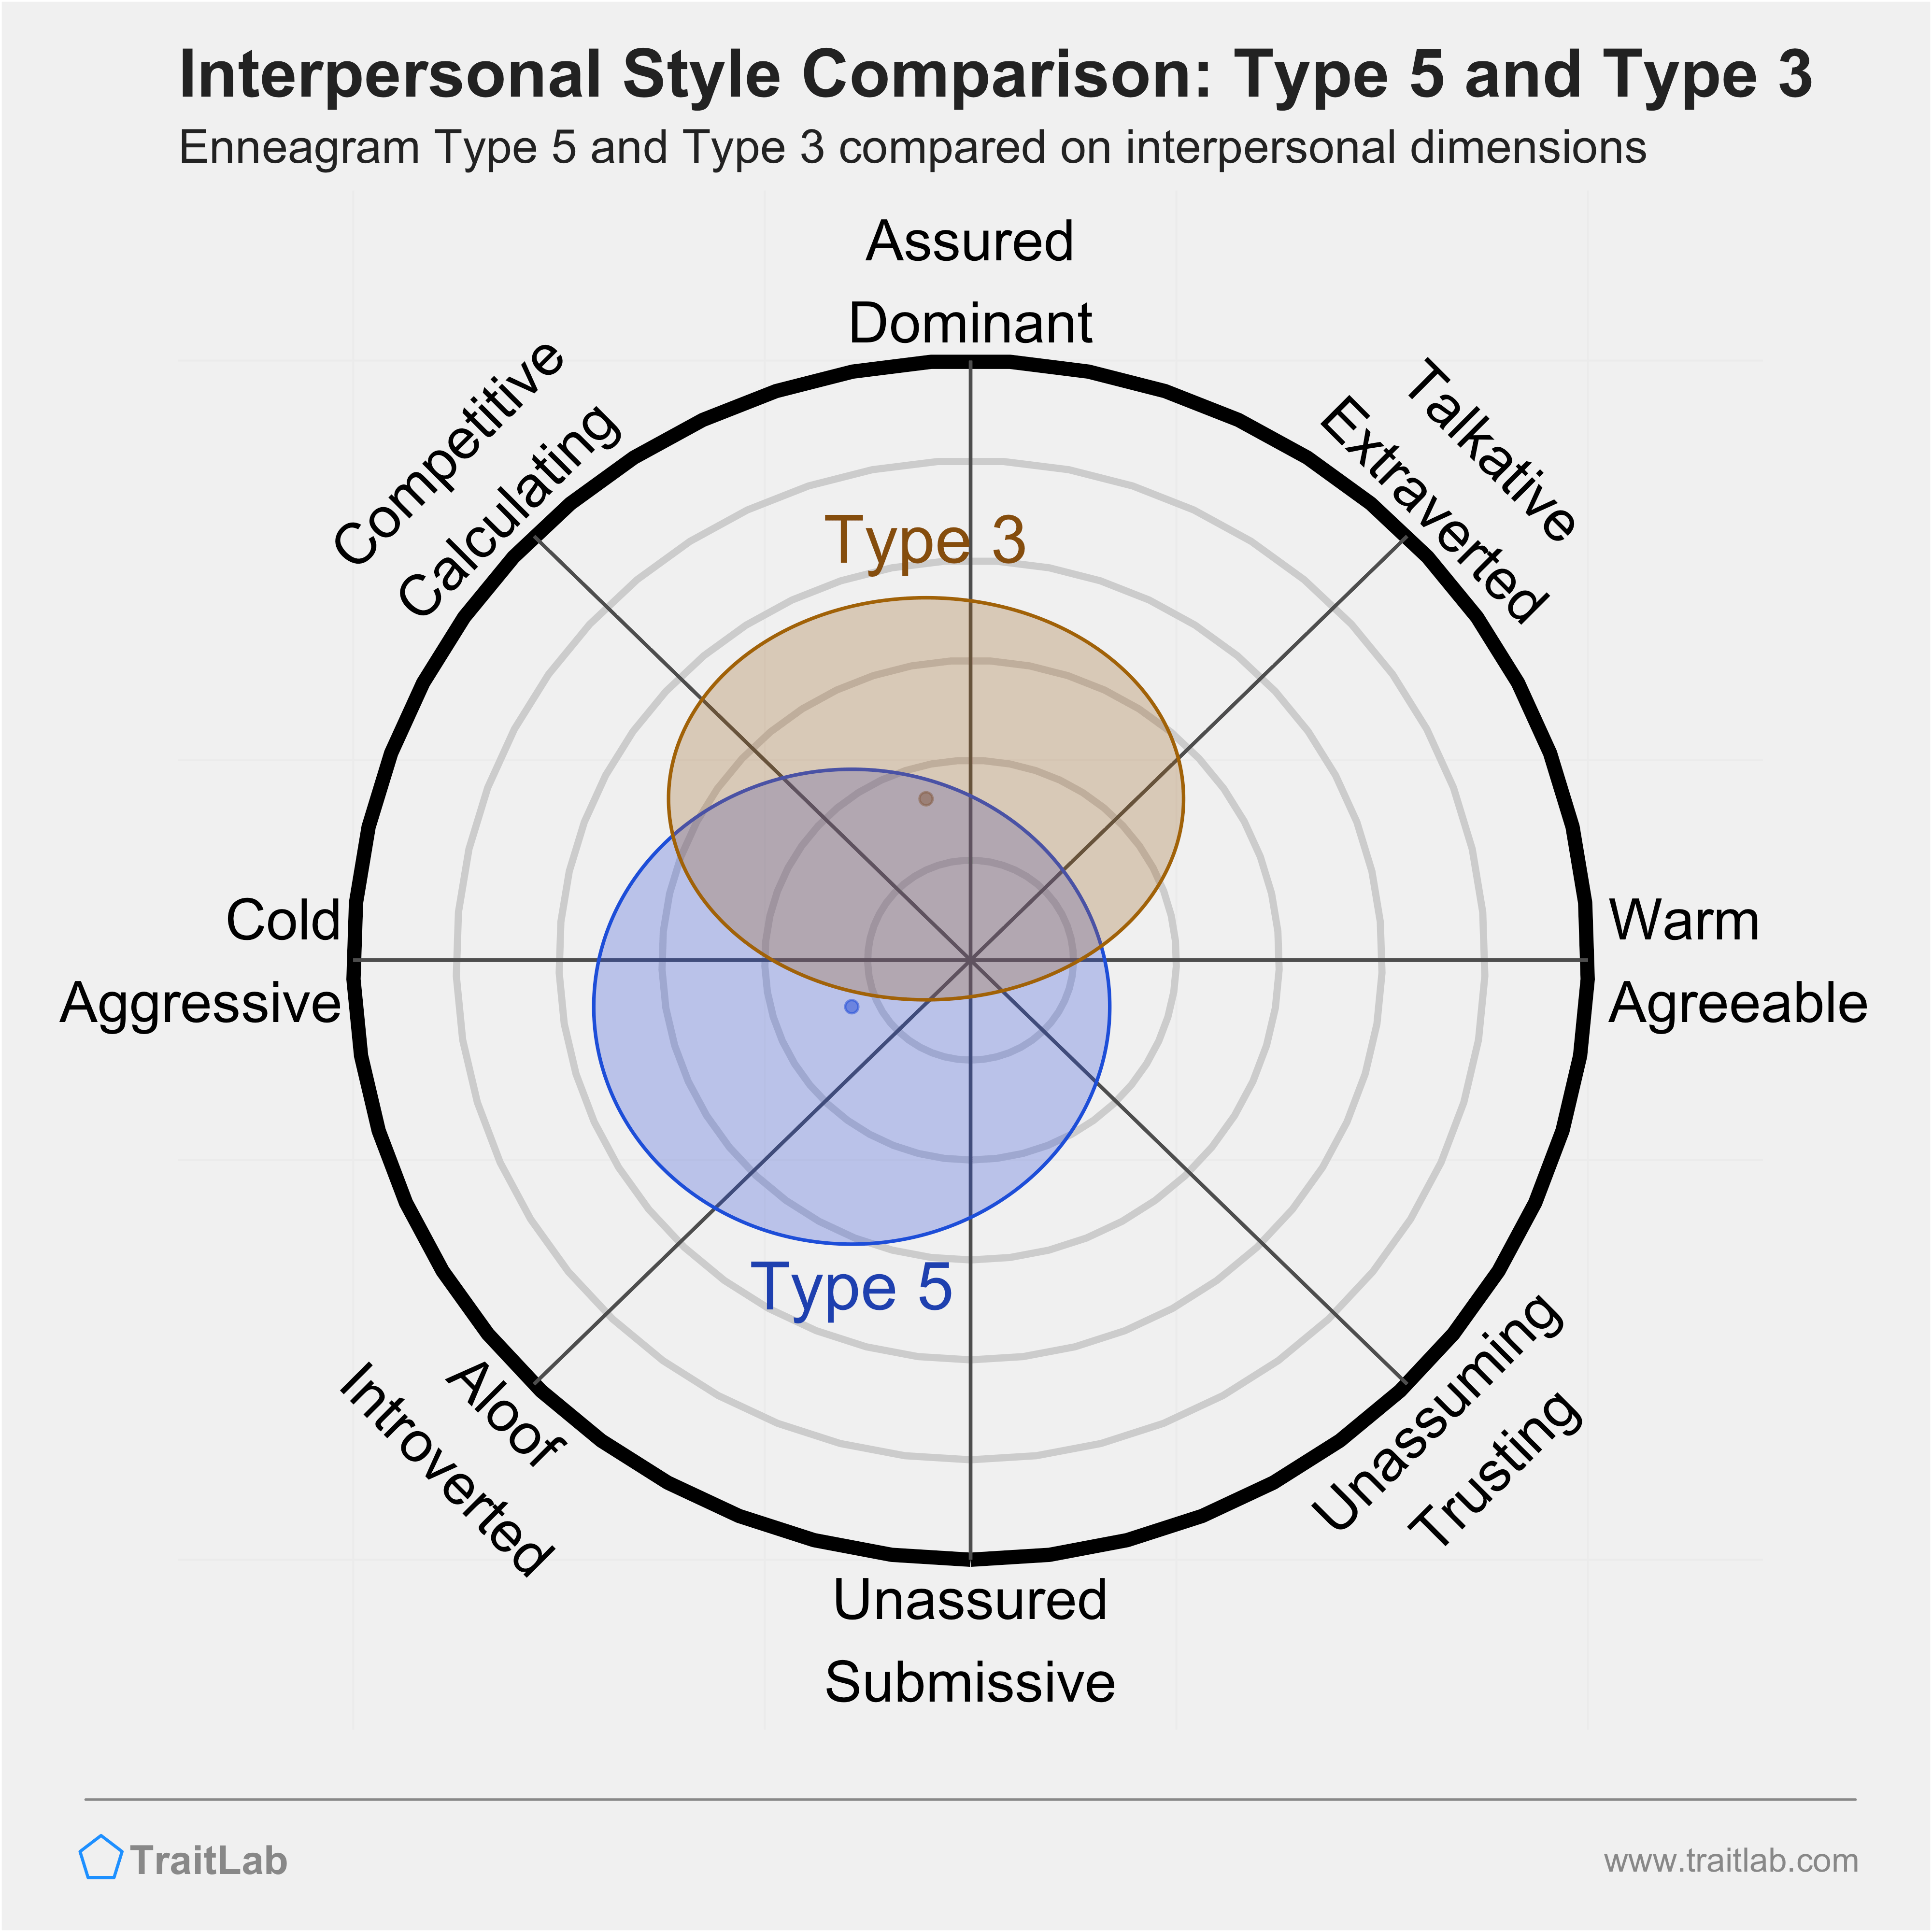 Enneagram Type 5 and Type 3 comparison across interpersonal dimensions